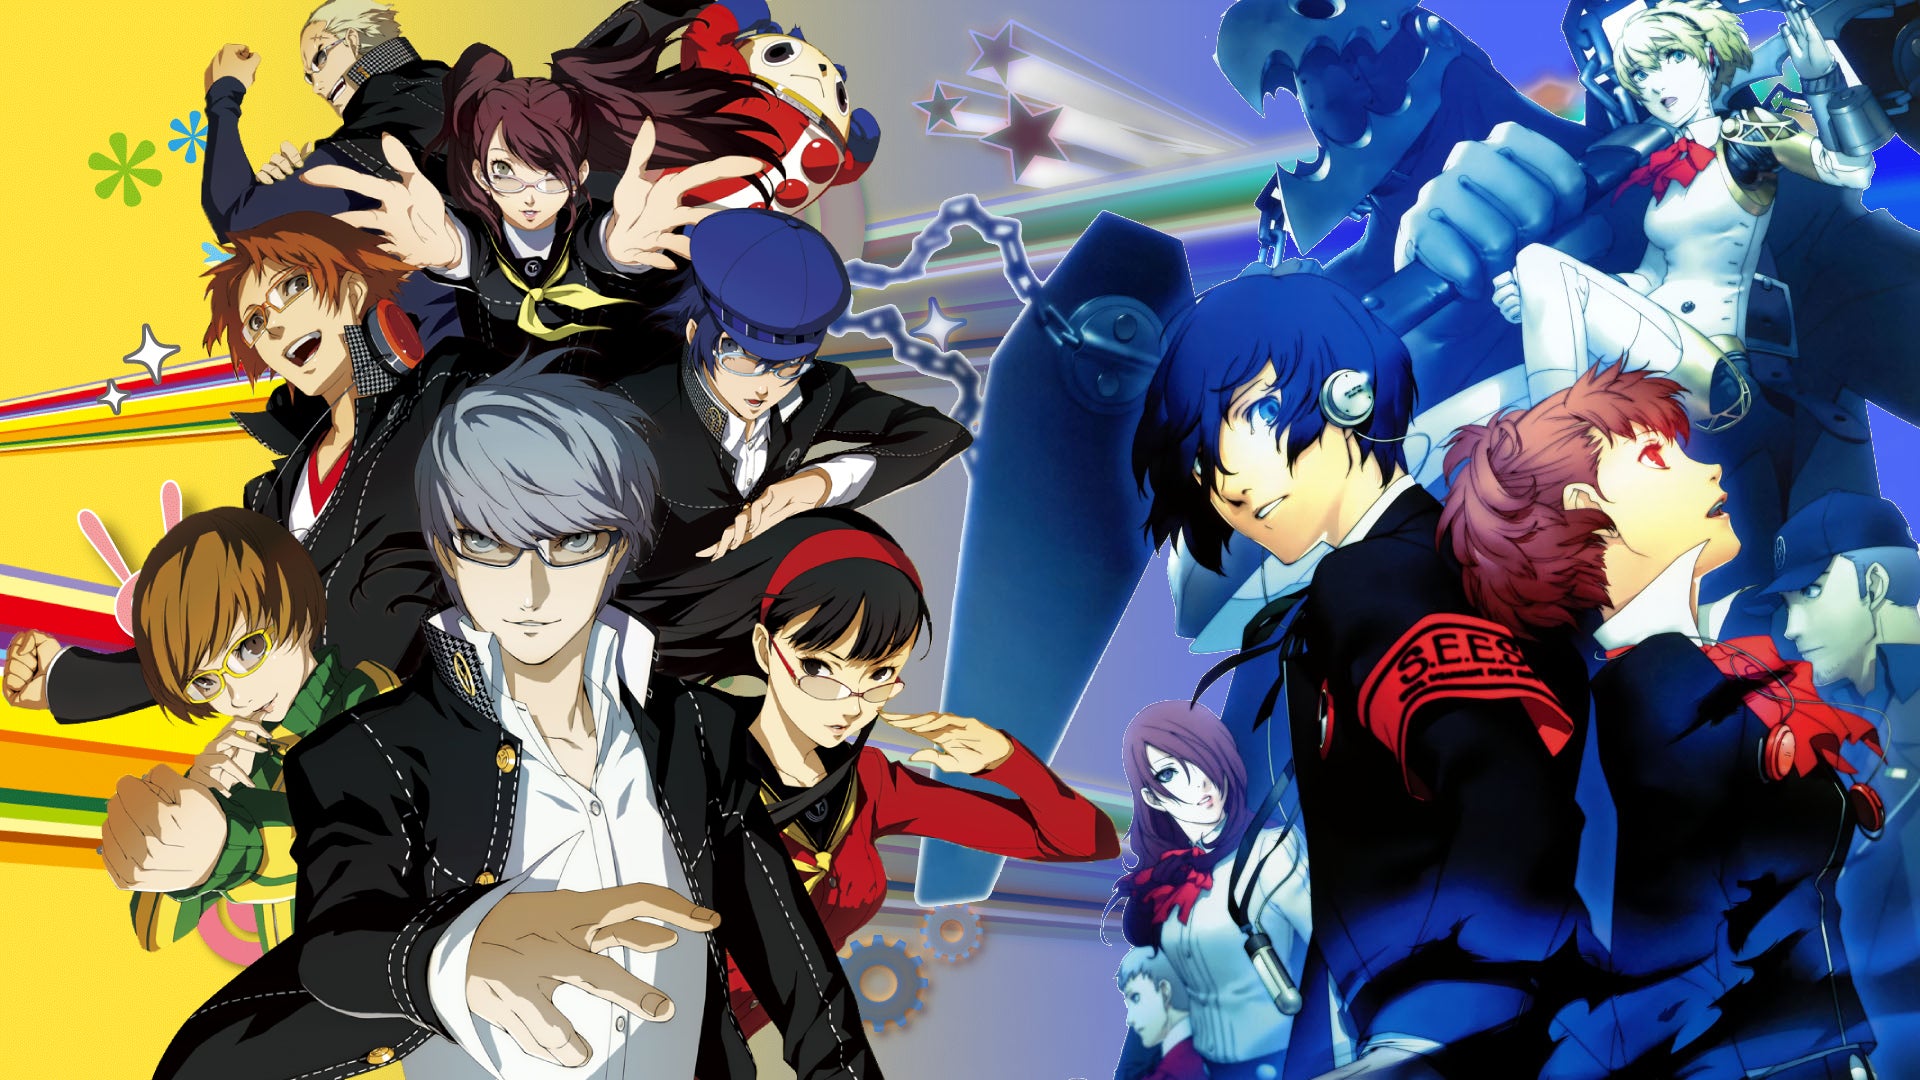 Image for Persona 5 Royal, Persona 4 Golden, and Persona 3 Portable are coming to Xbox Game Pass